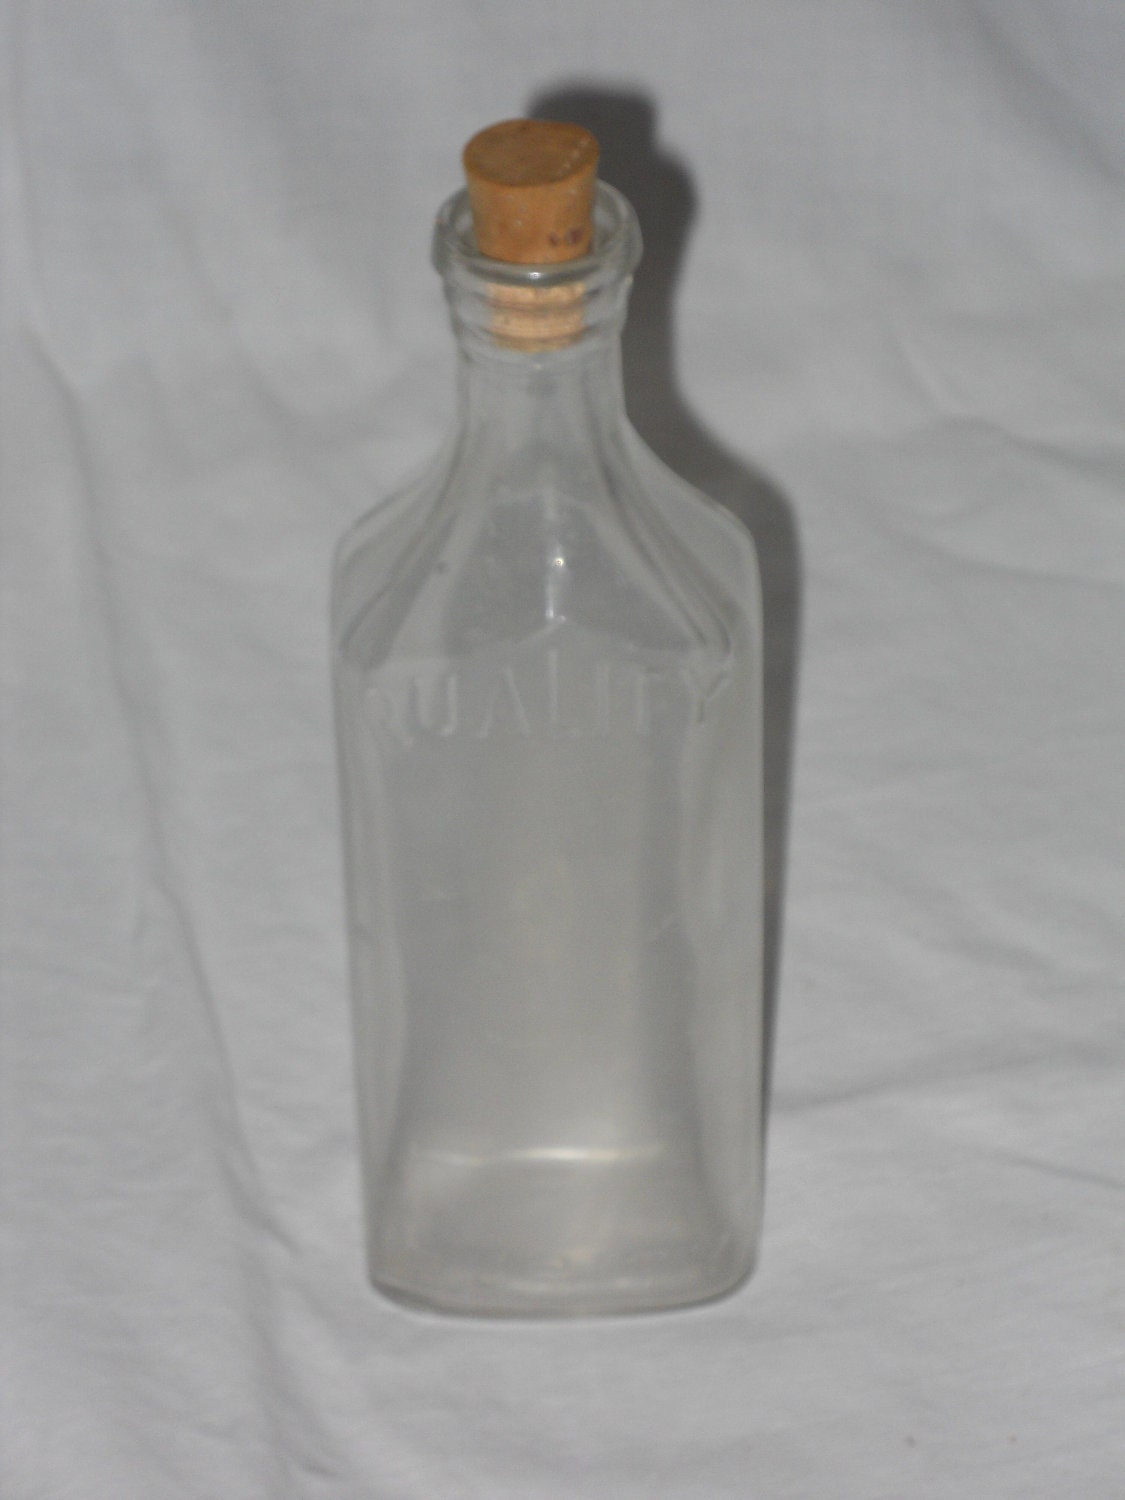 vintage 6 ounce medicine bottle Quality Purity by historygal2